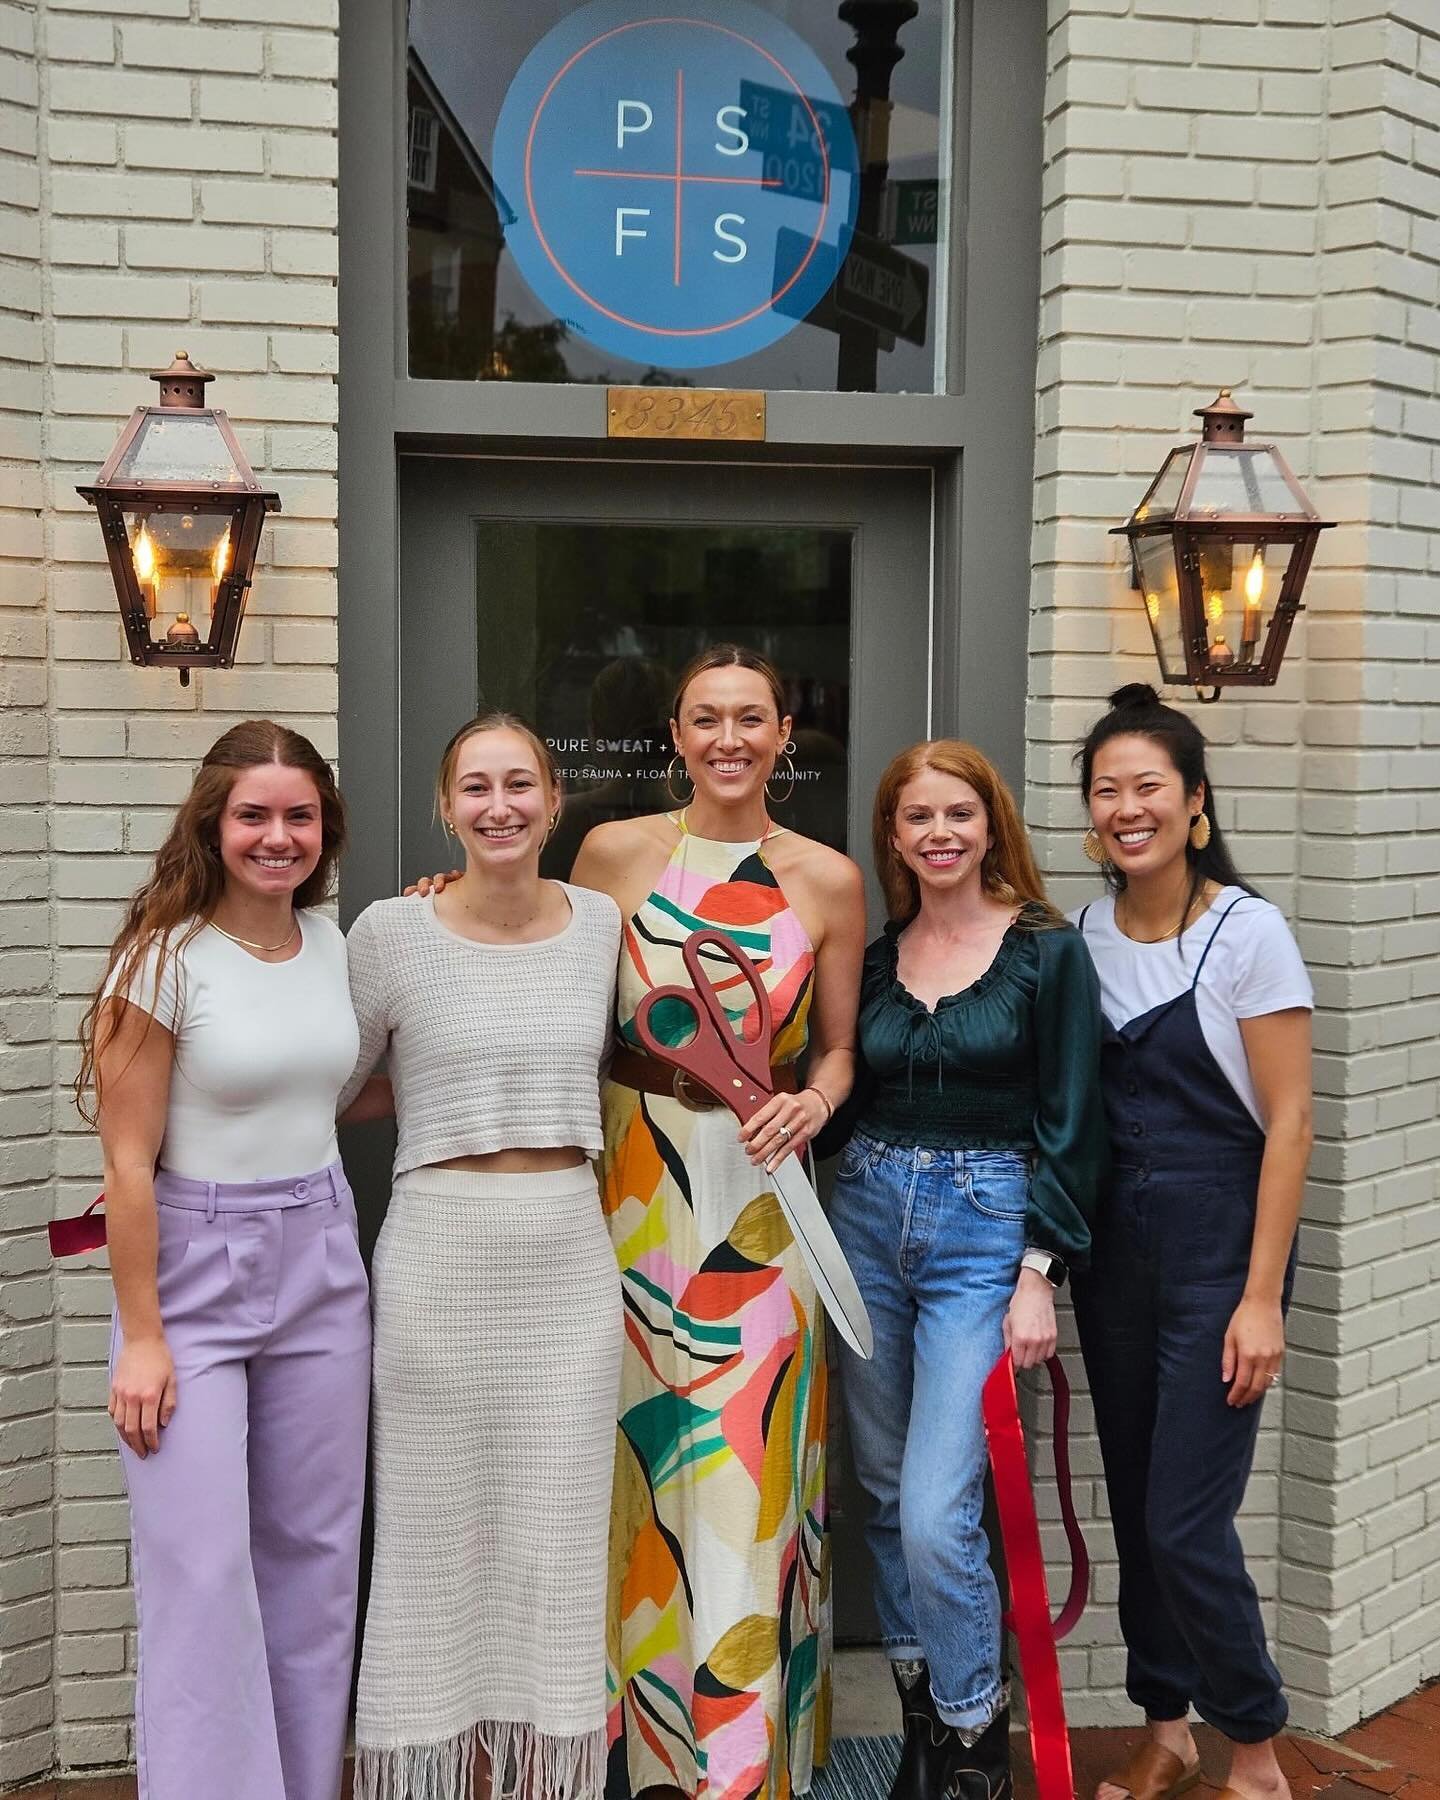 A heartfelt THANK YOU from our team to the city of #WashingtonDC, neighbors of Georgetown, and everyone that came to support our Grand Opening this weekend. 💙

+An an extra big hug for our friends @georgetownmainst, @downdogyoga, &amp; @greentouchbu